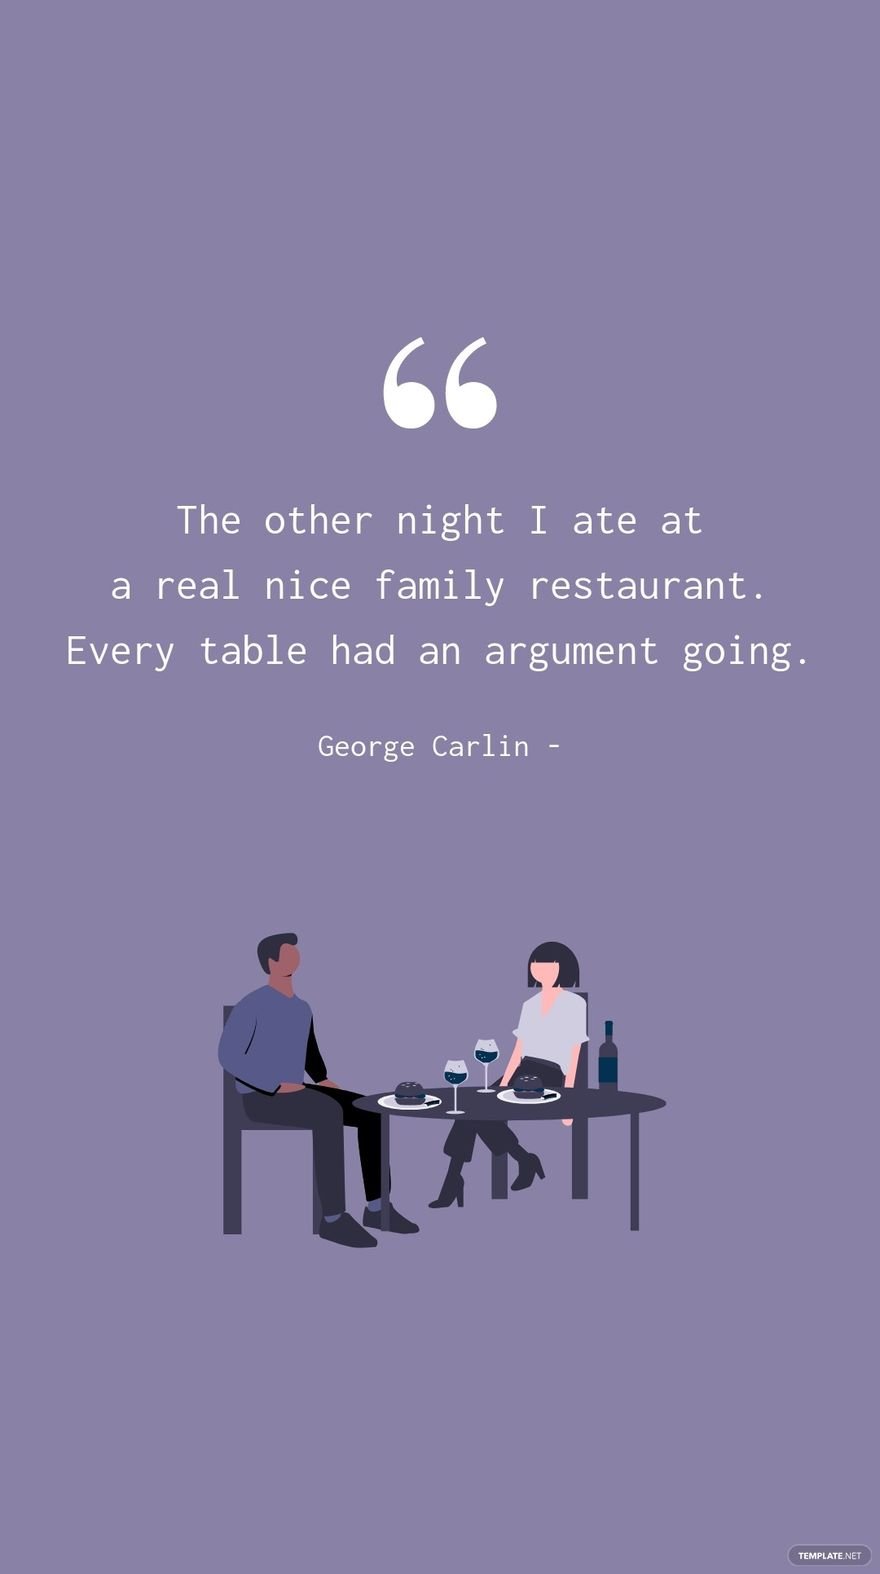 Free George Carlin - The other night I ate at a real nice family restaurant. Every table had an argument going. in JPG